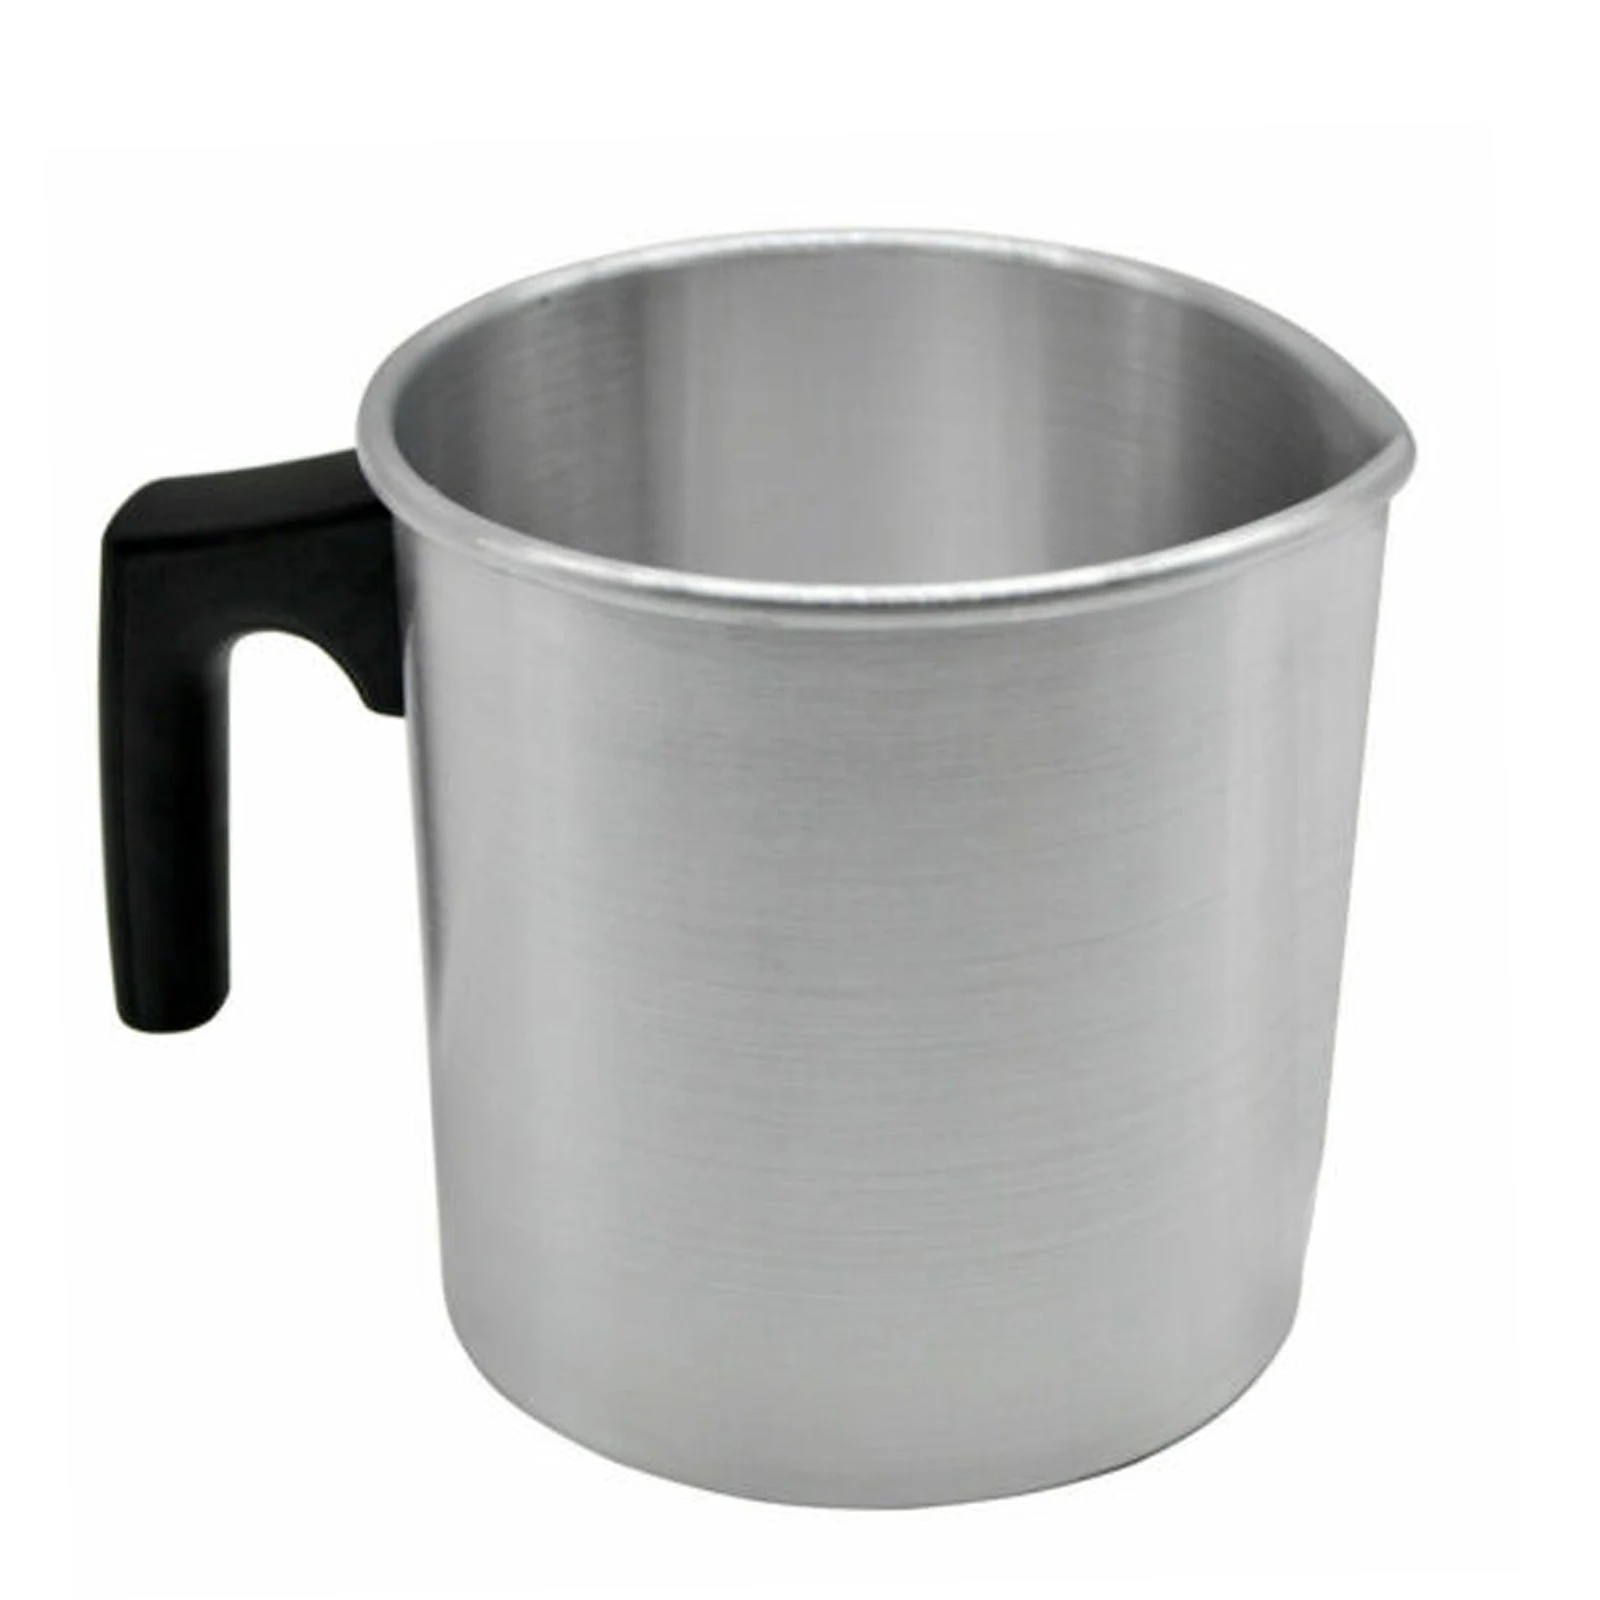 Gelentea 1.2/3L Wax Melting Pot Pouring Pitcher Jug for Candle Soap Making Hand Tools Supplies 